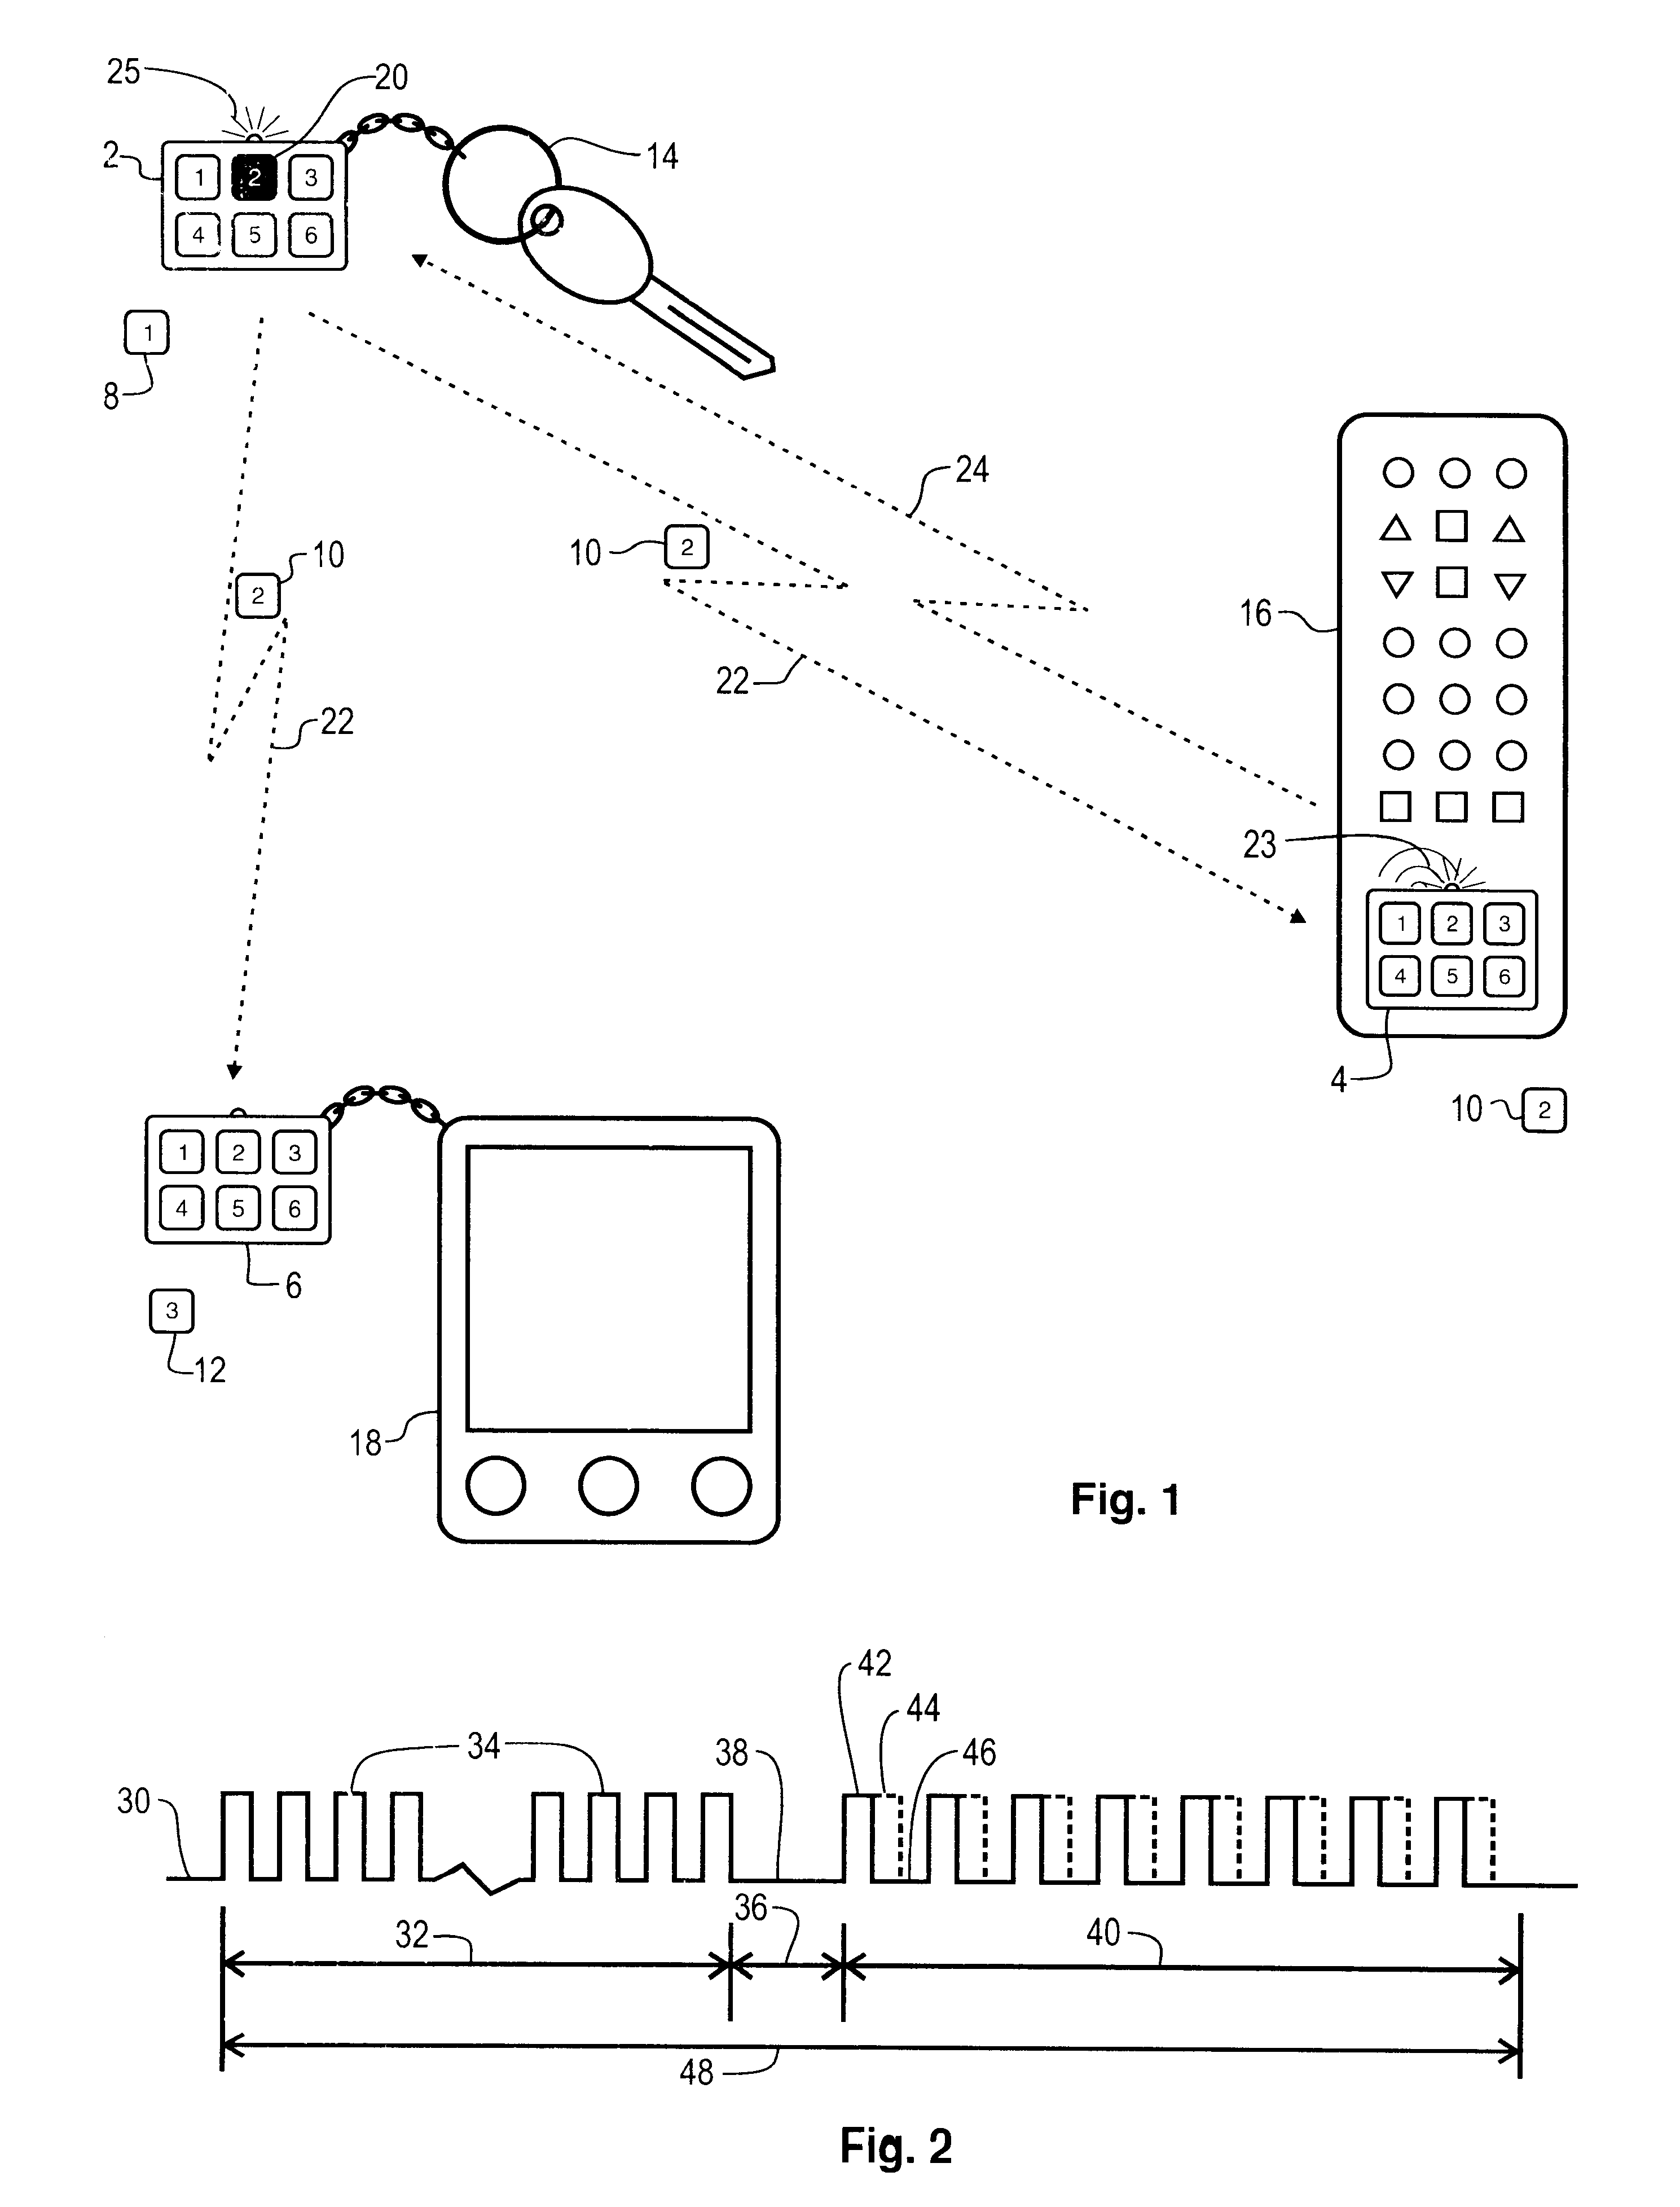 Electronic locator system and method